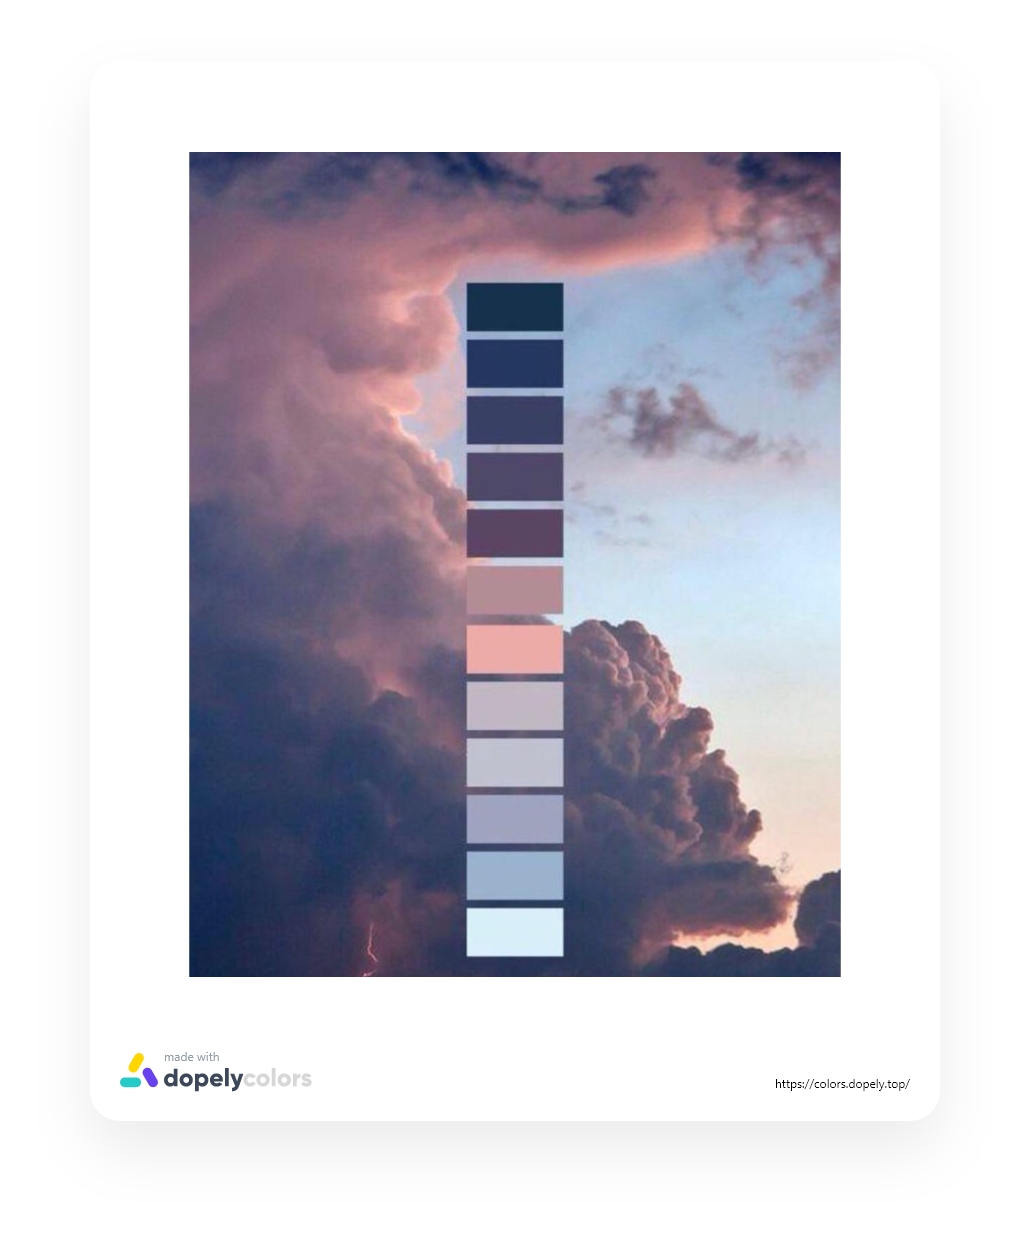 Color palette inspiration from natural sky